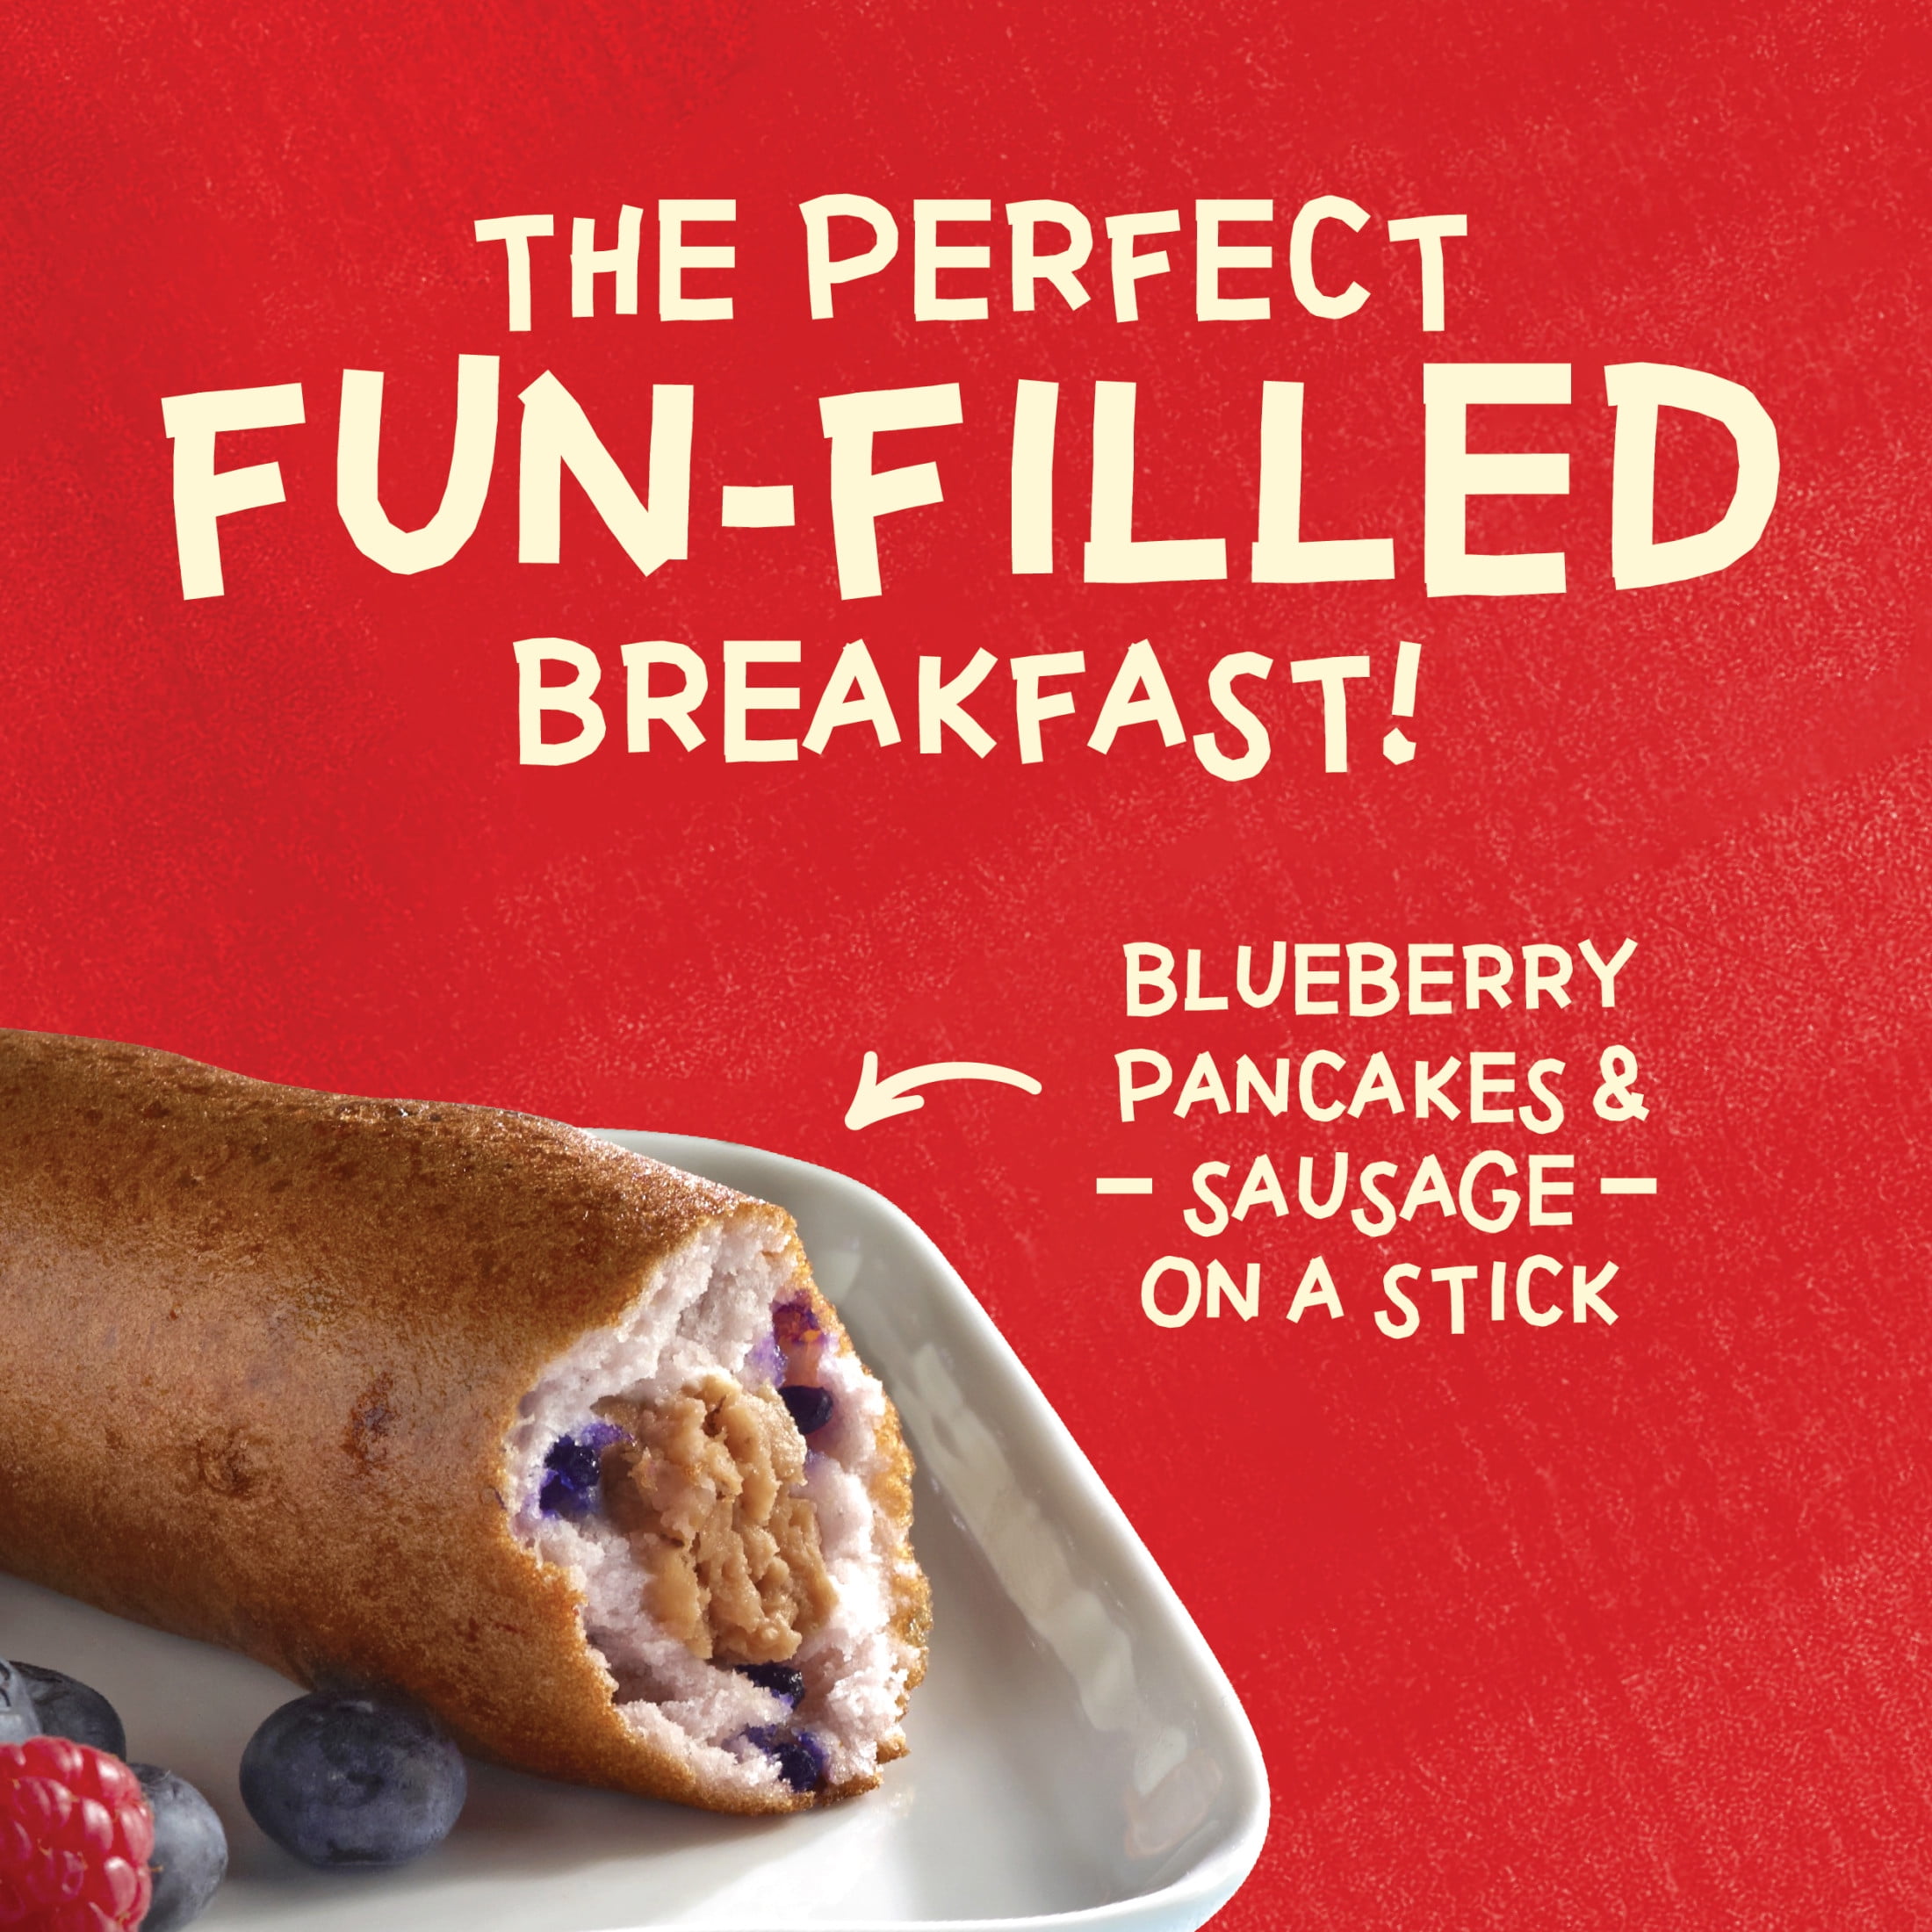 How to make Blueberry Breakfast Sausage Pancakes